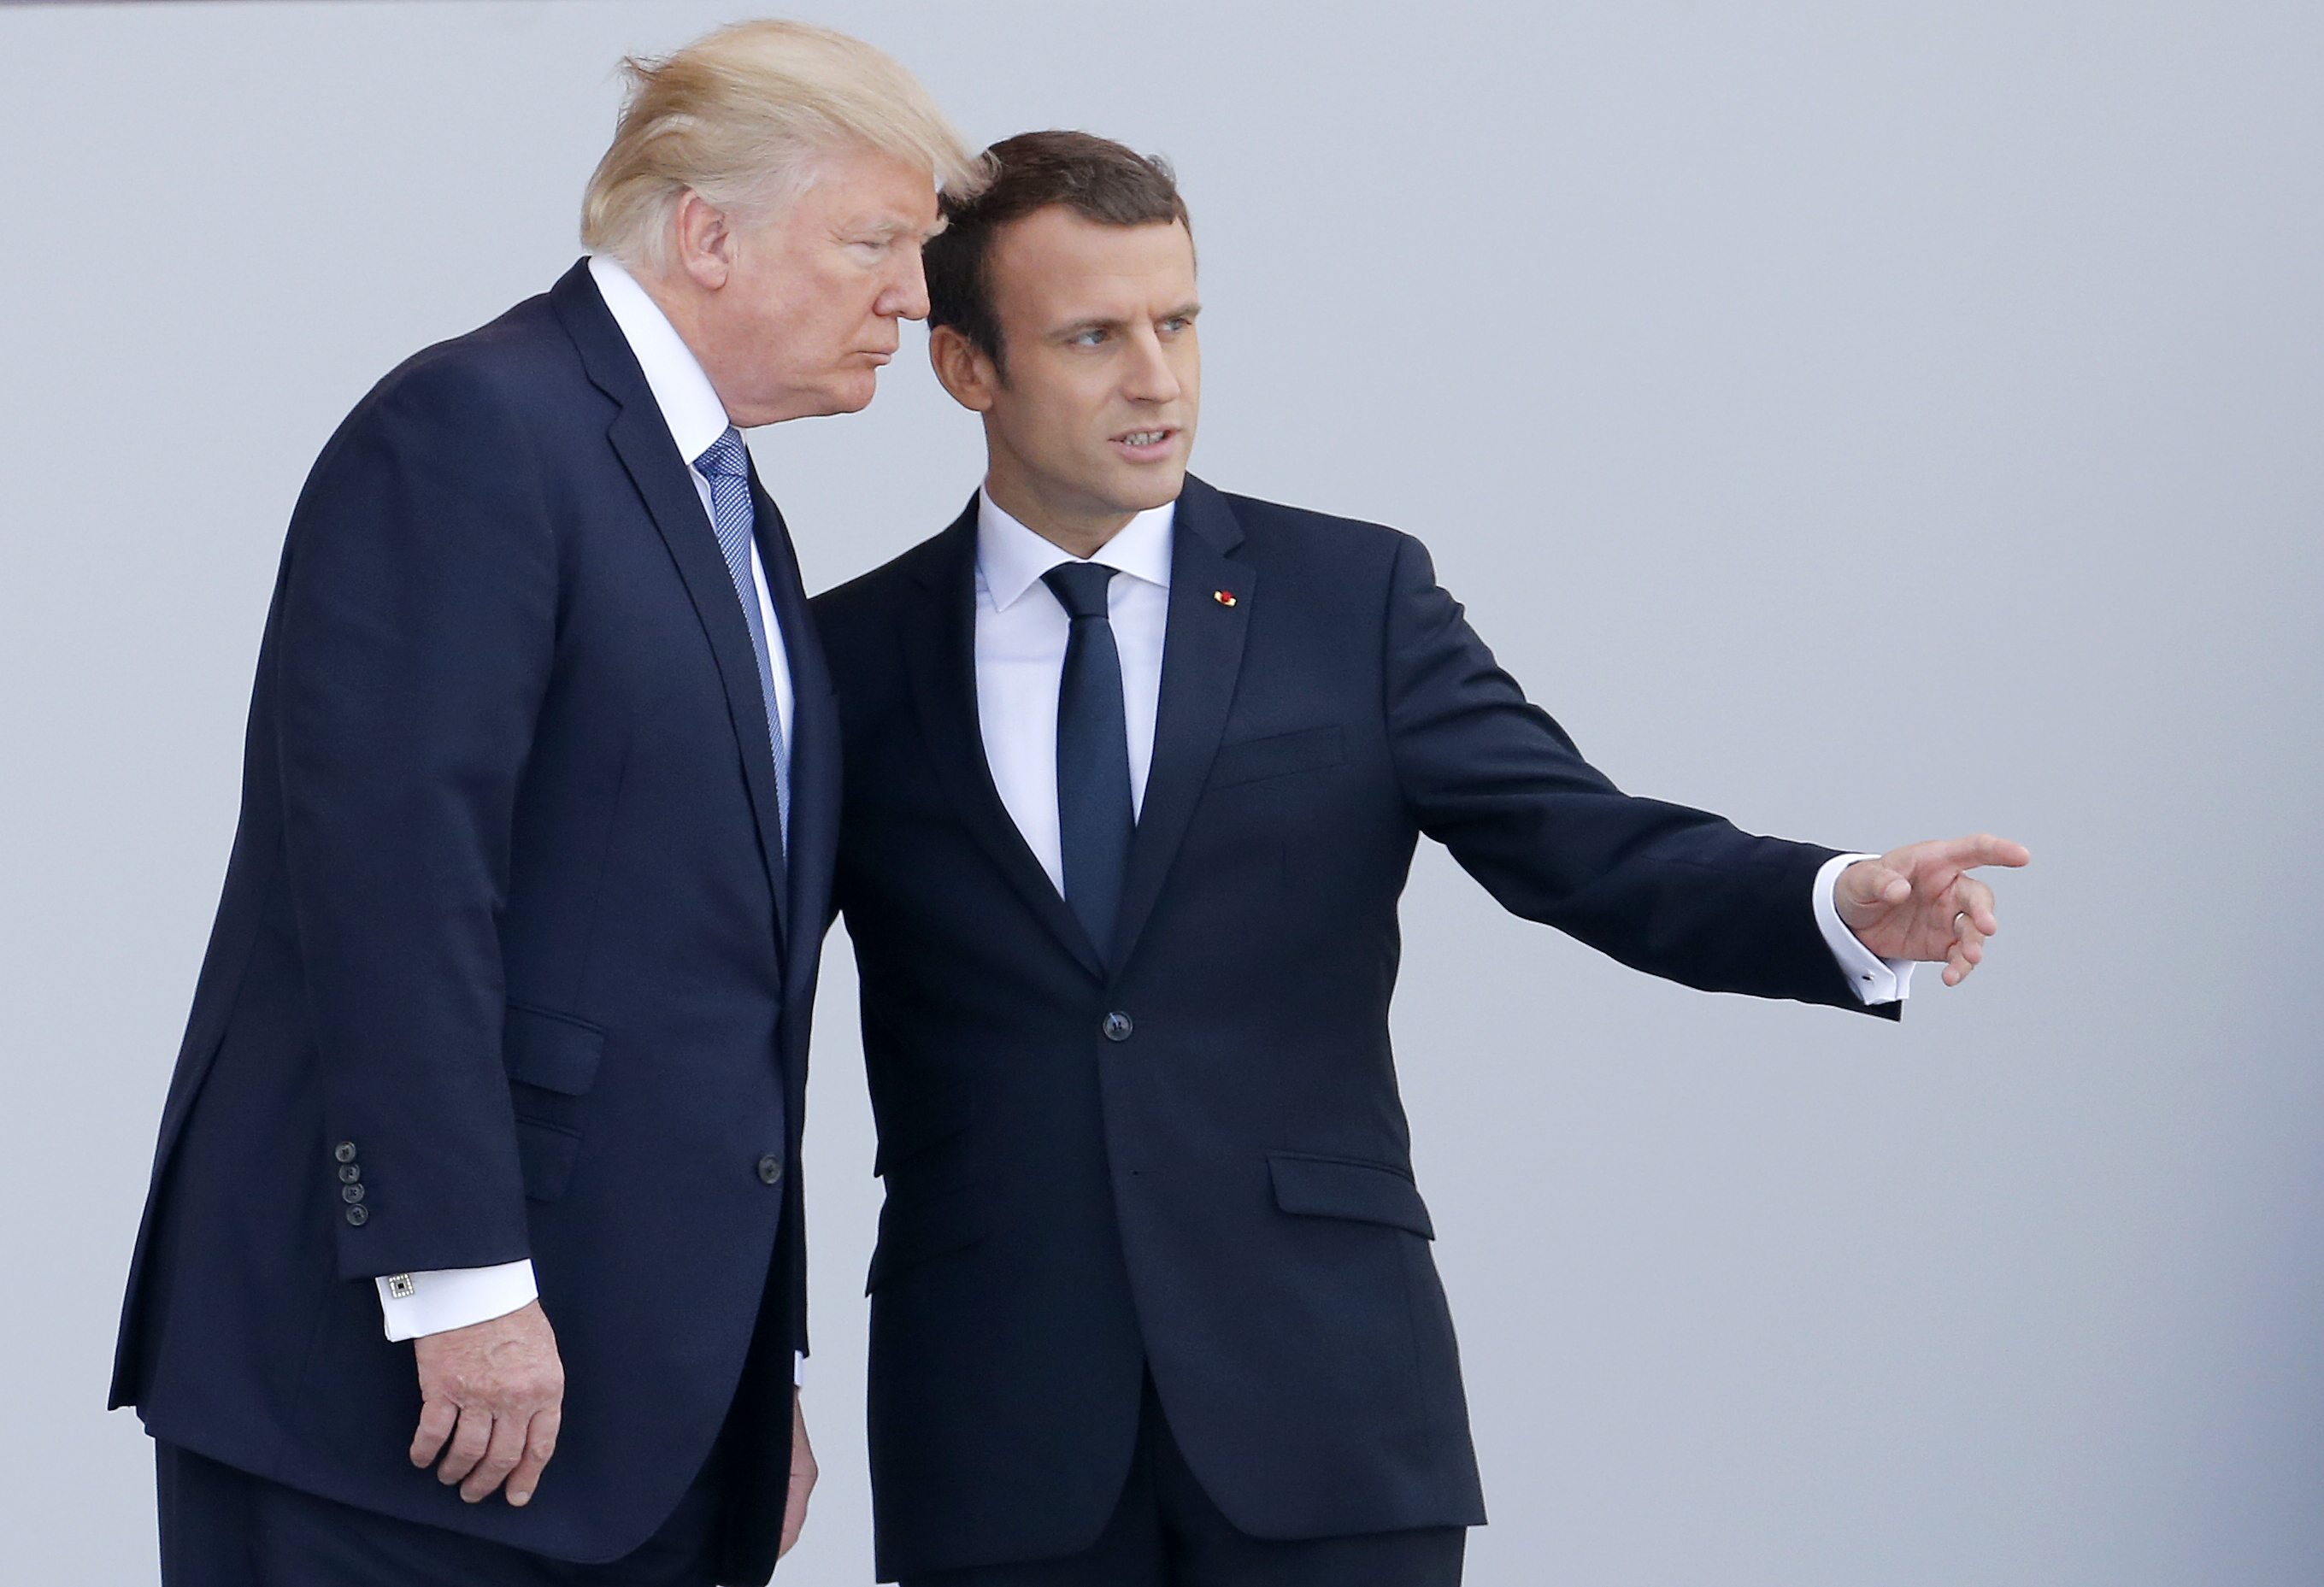 U.S President Donald Trump and French President Emmanuel Macron attend the traditional Bastille day military parade on the Champs-Elysees on July 14, 2017 in Paris France. (Thierry Chesnot&mdash;Getty Images)